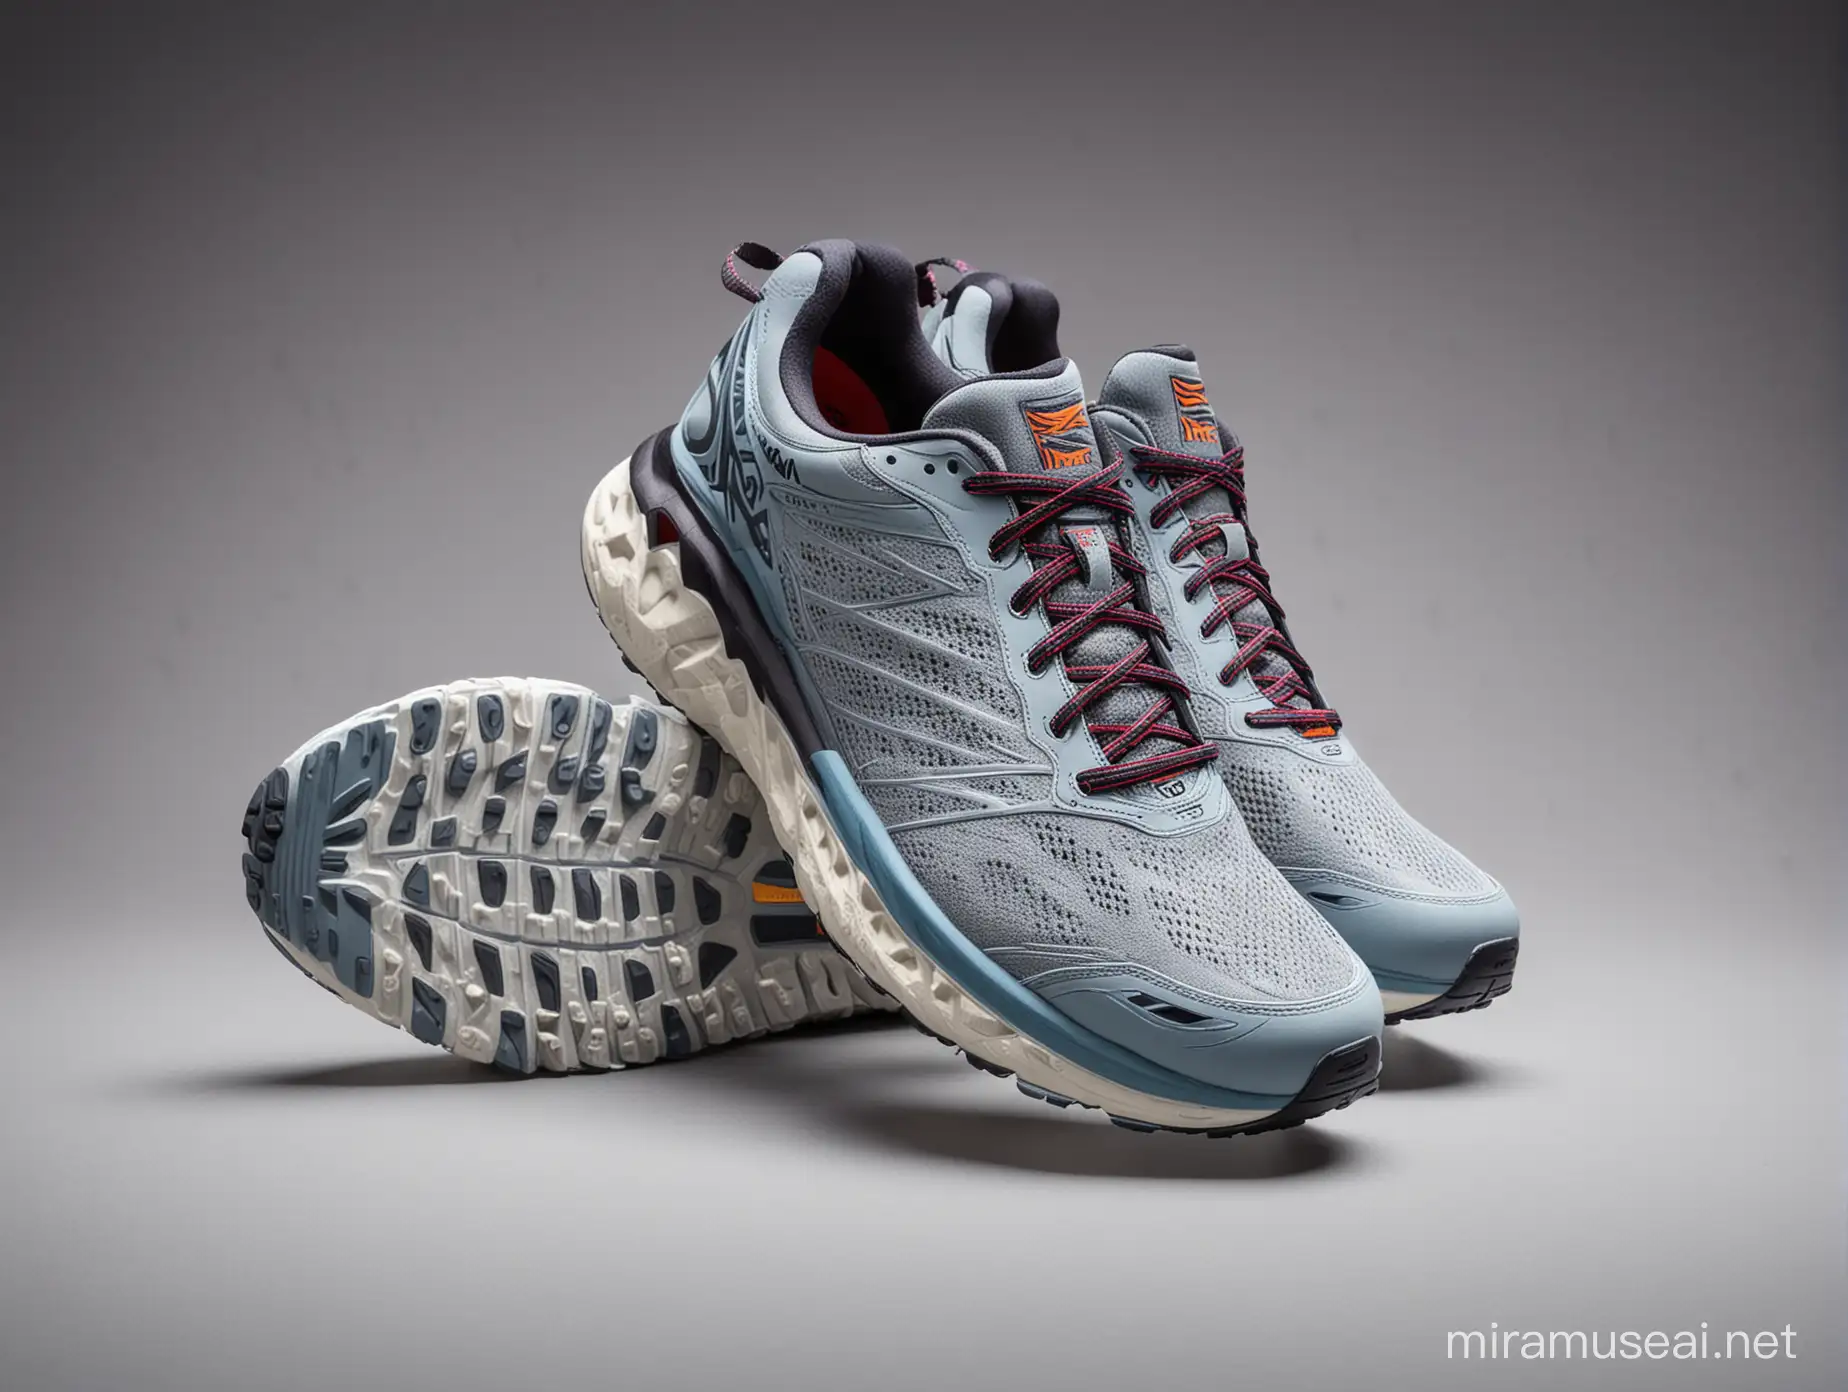 Hoka Challenger ATR 7 Running Shoes and the background is light grey